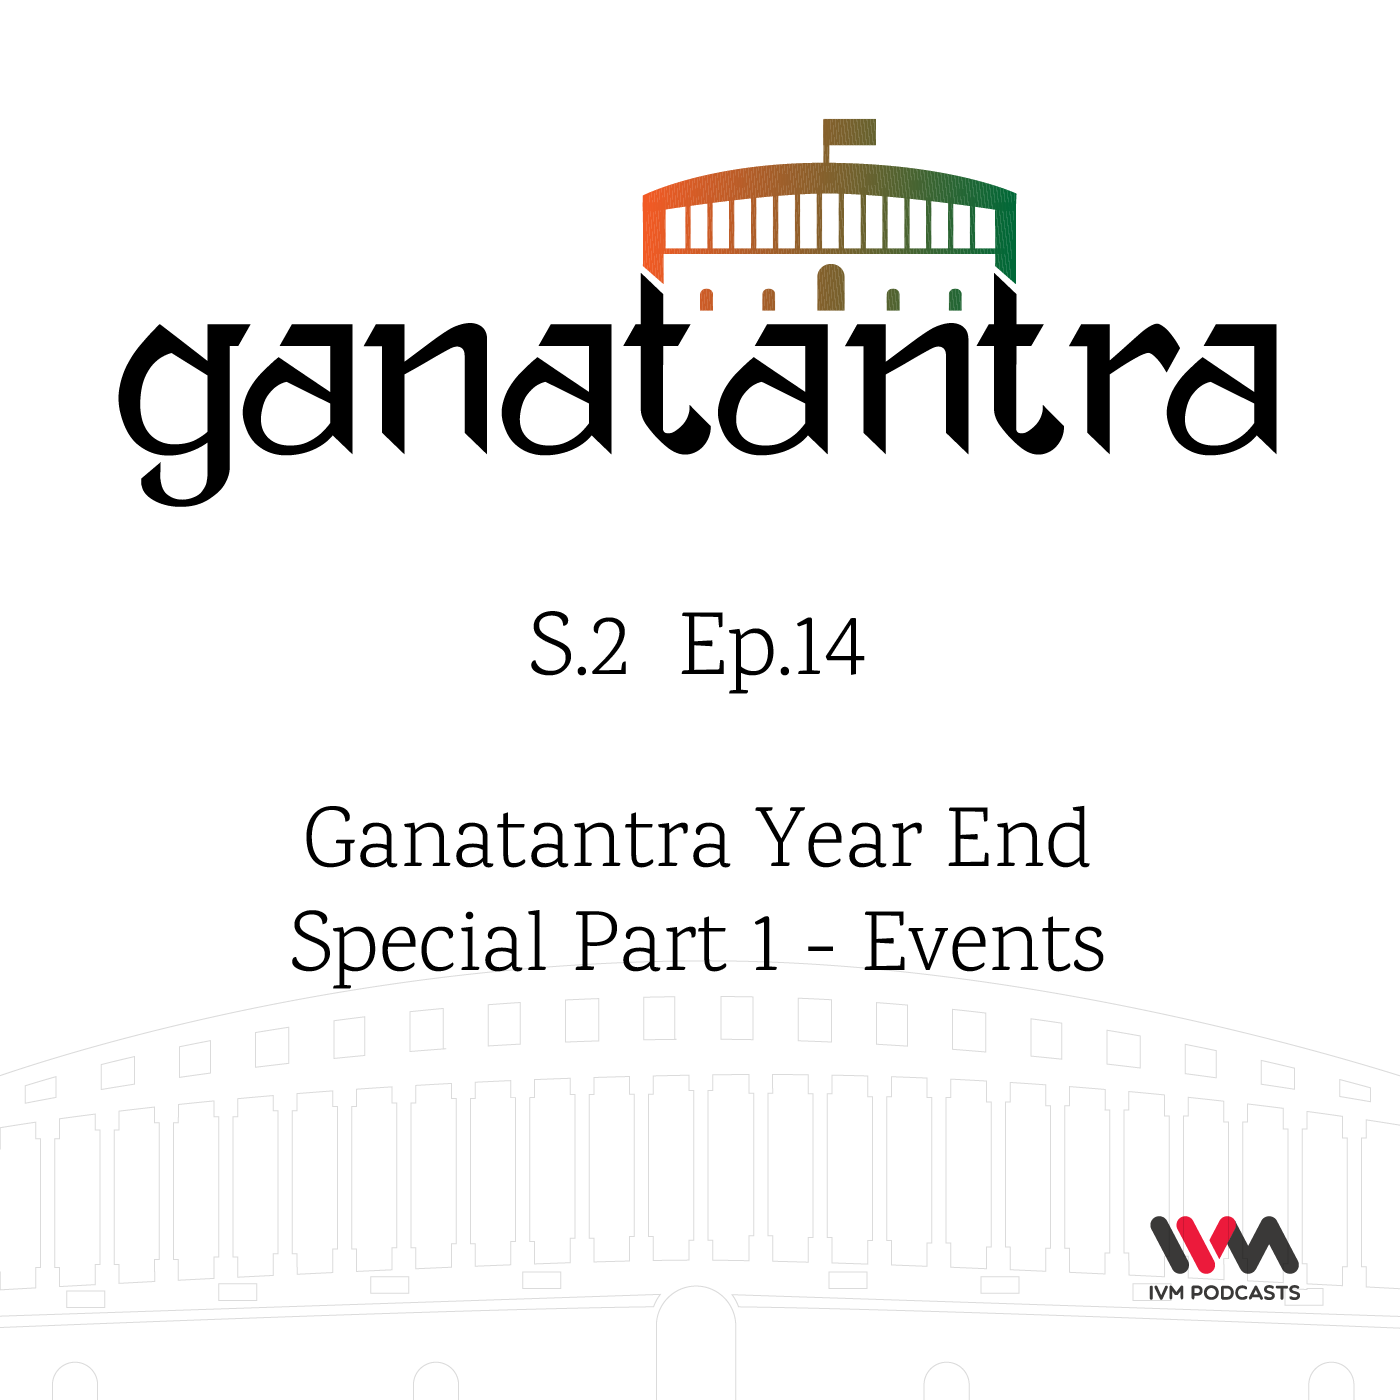 S02 E14: Ganatantra Year End Special Part 1 - Events